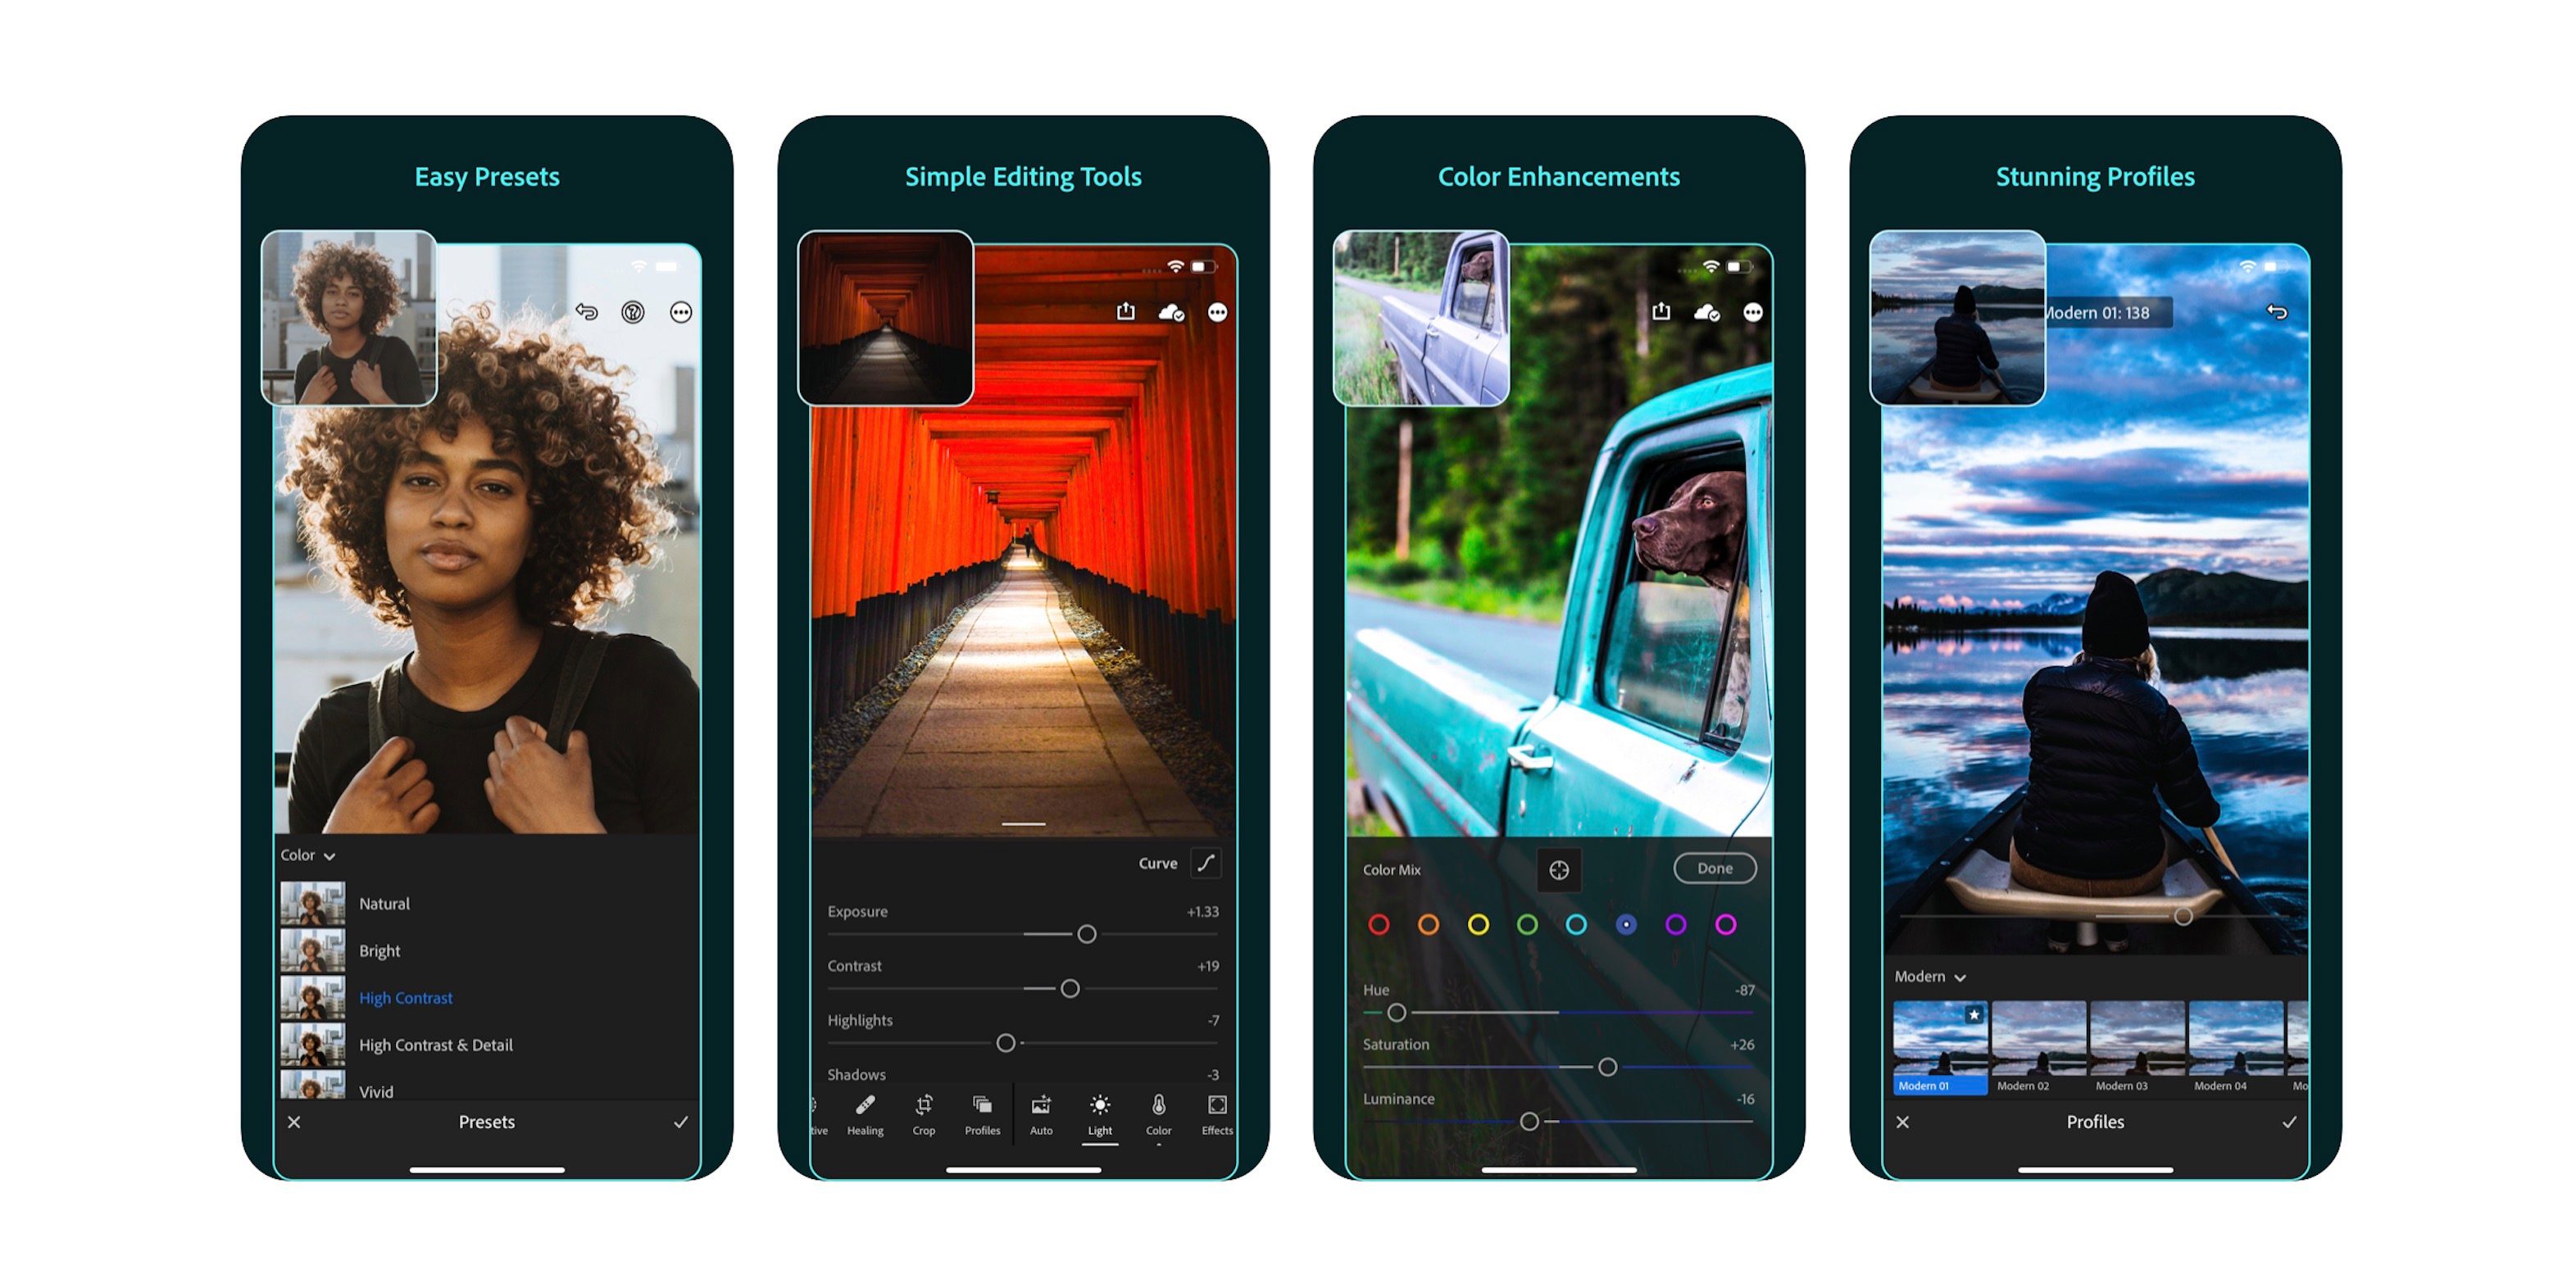 Adobe confirms Lightroom iOS photos erased due to update bug are ‘not recoverable’